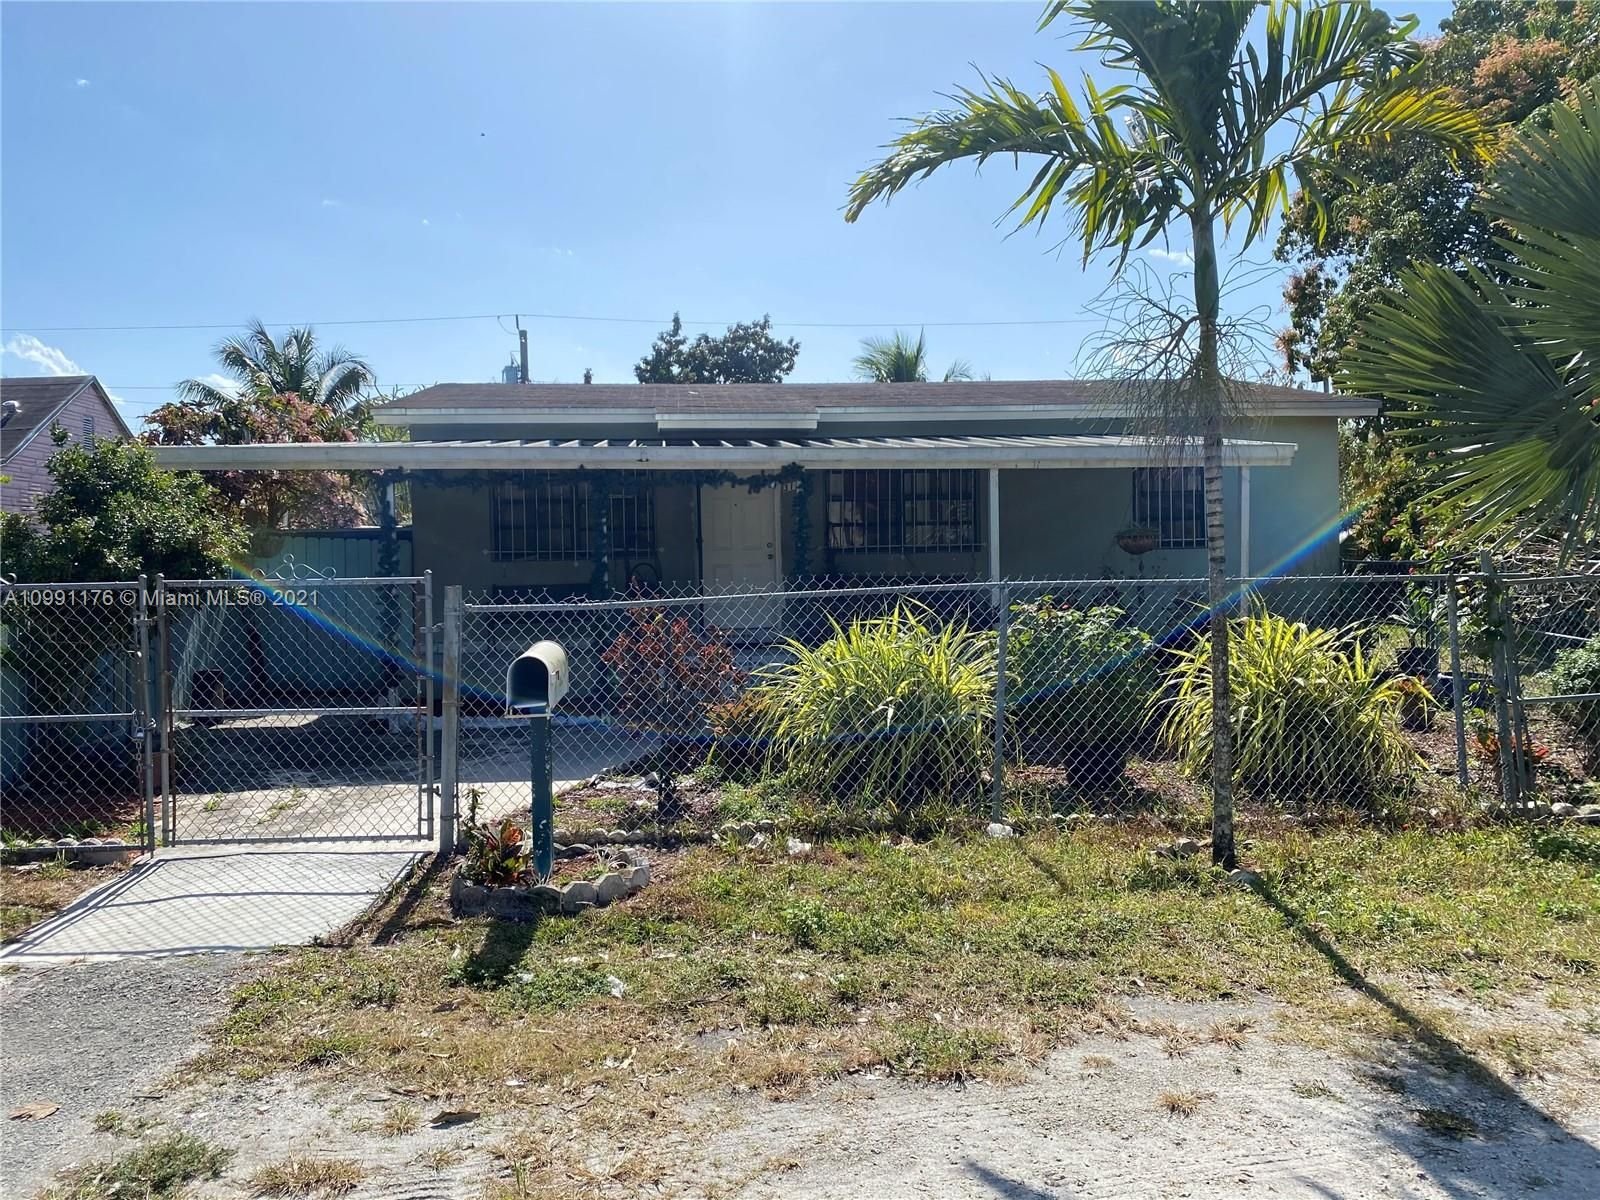 Real estate property located at 3120 134th St, Miami-Dade County, Opa-locka, FL